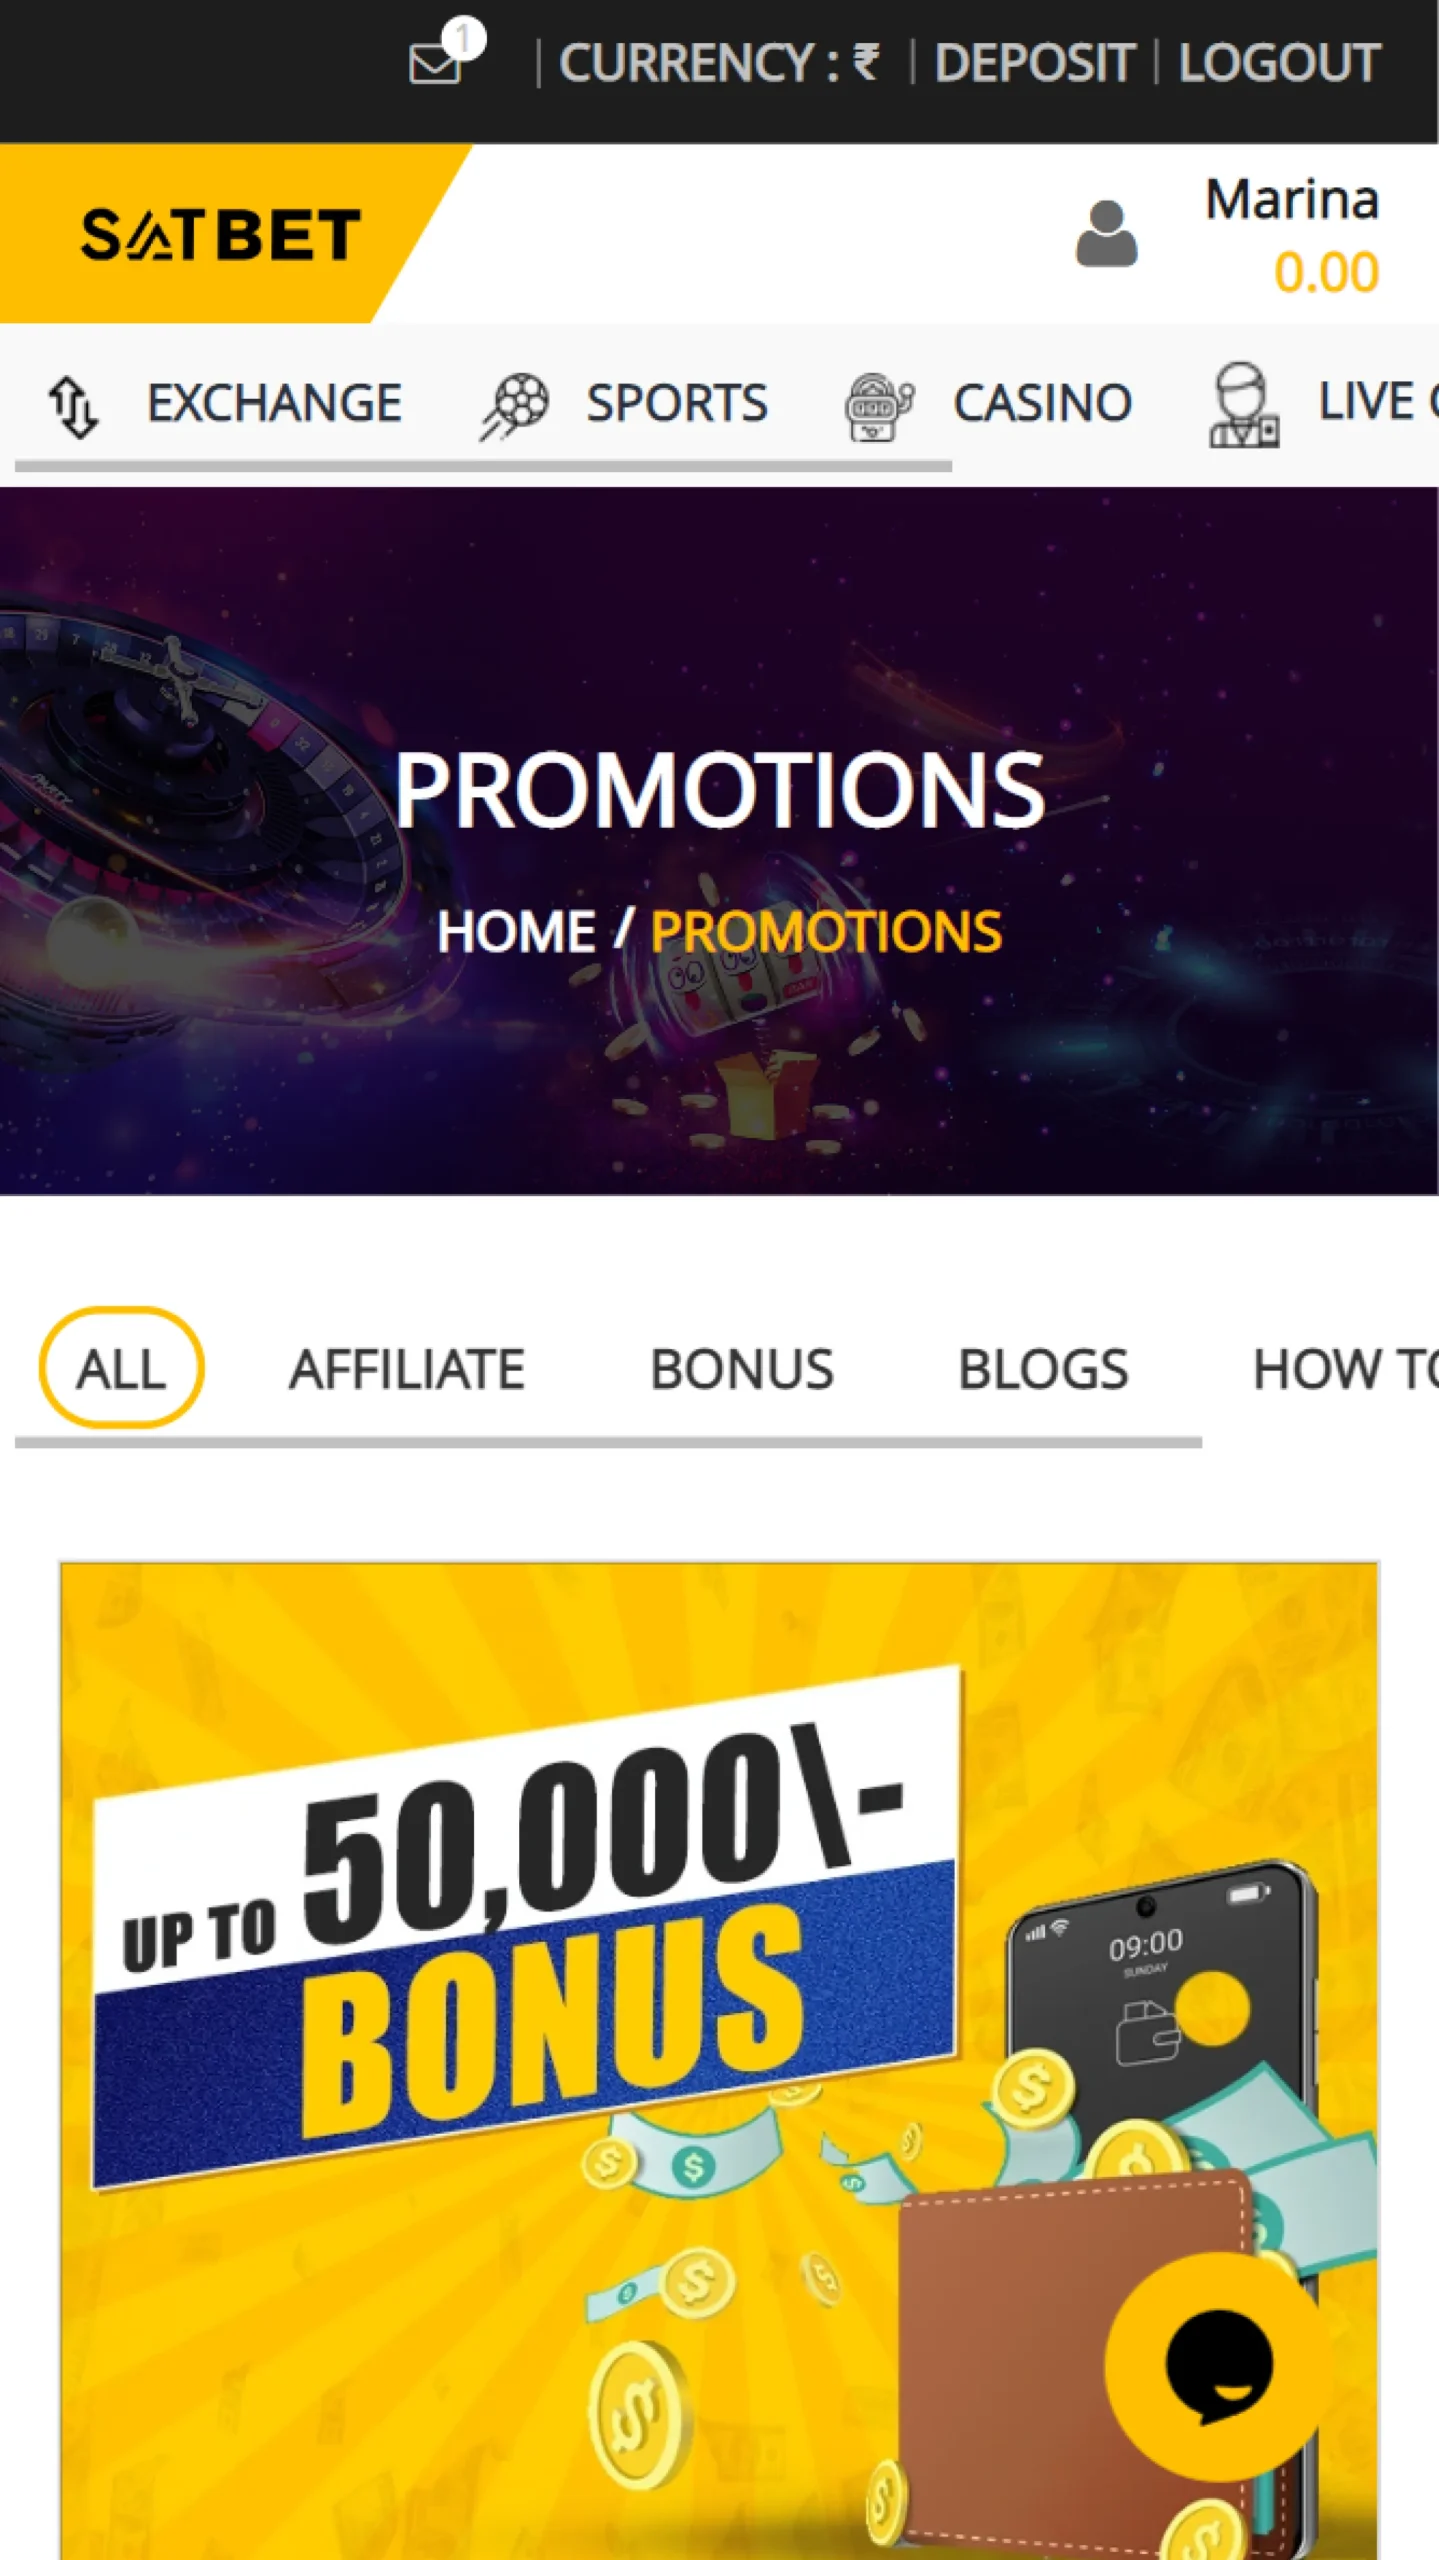 Visit promotions page.